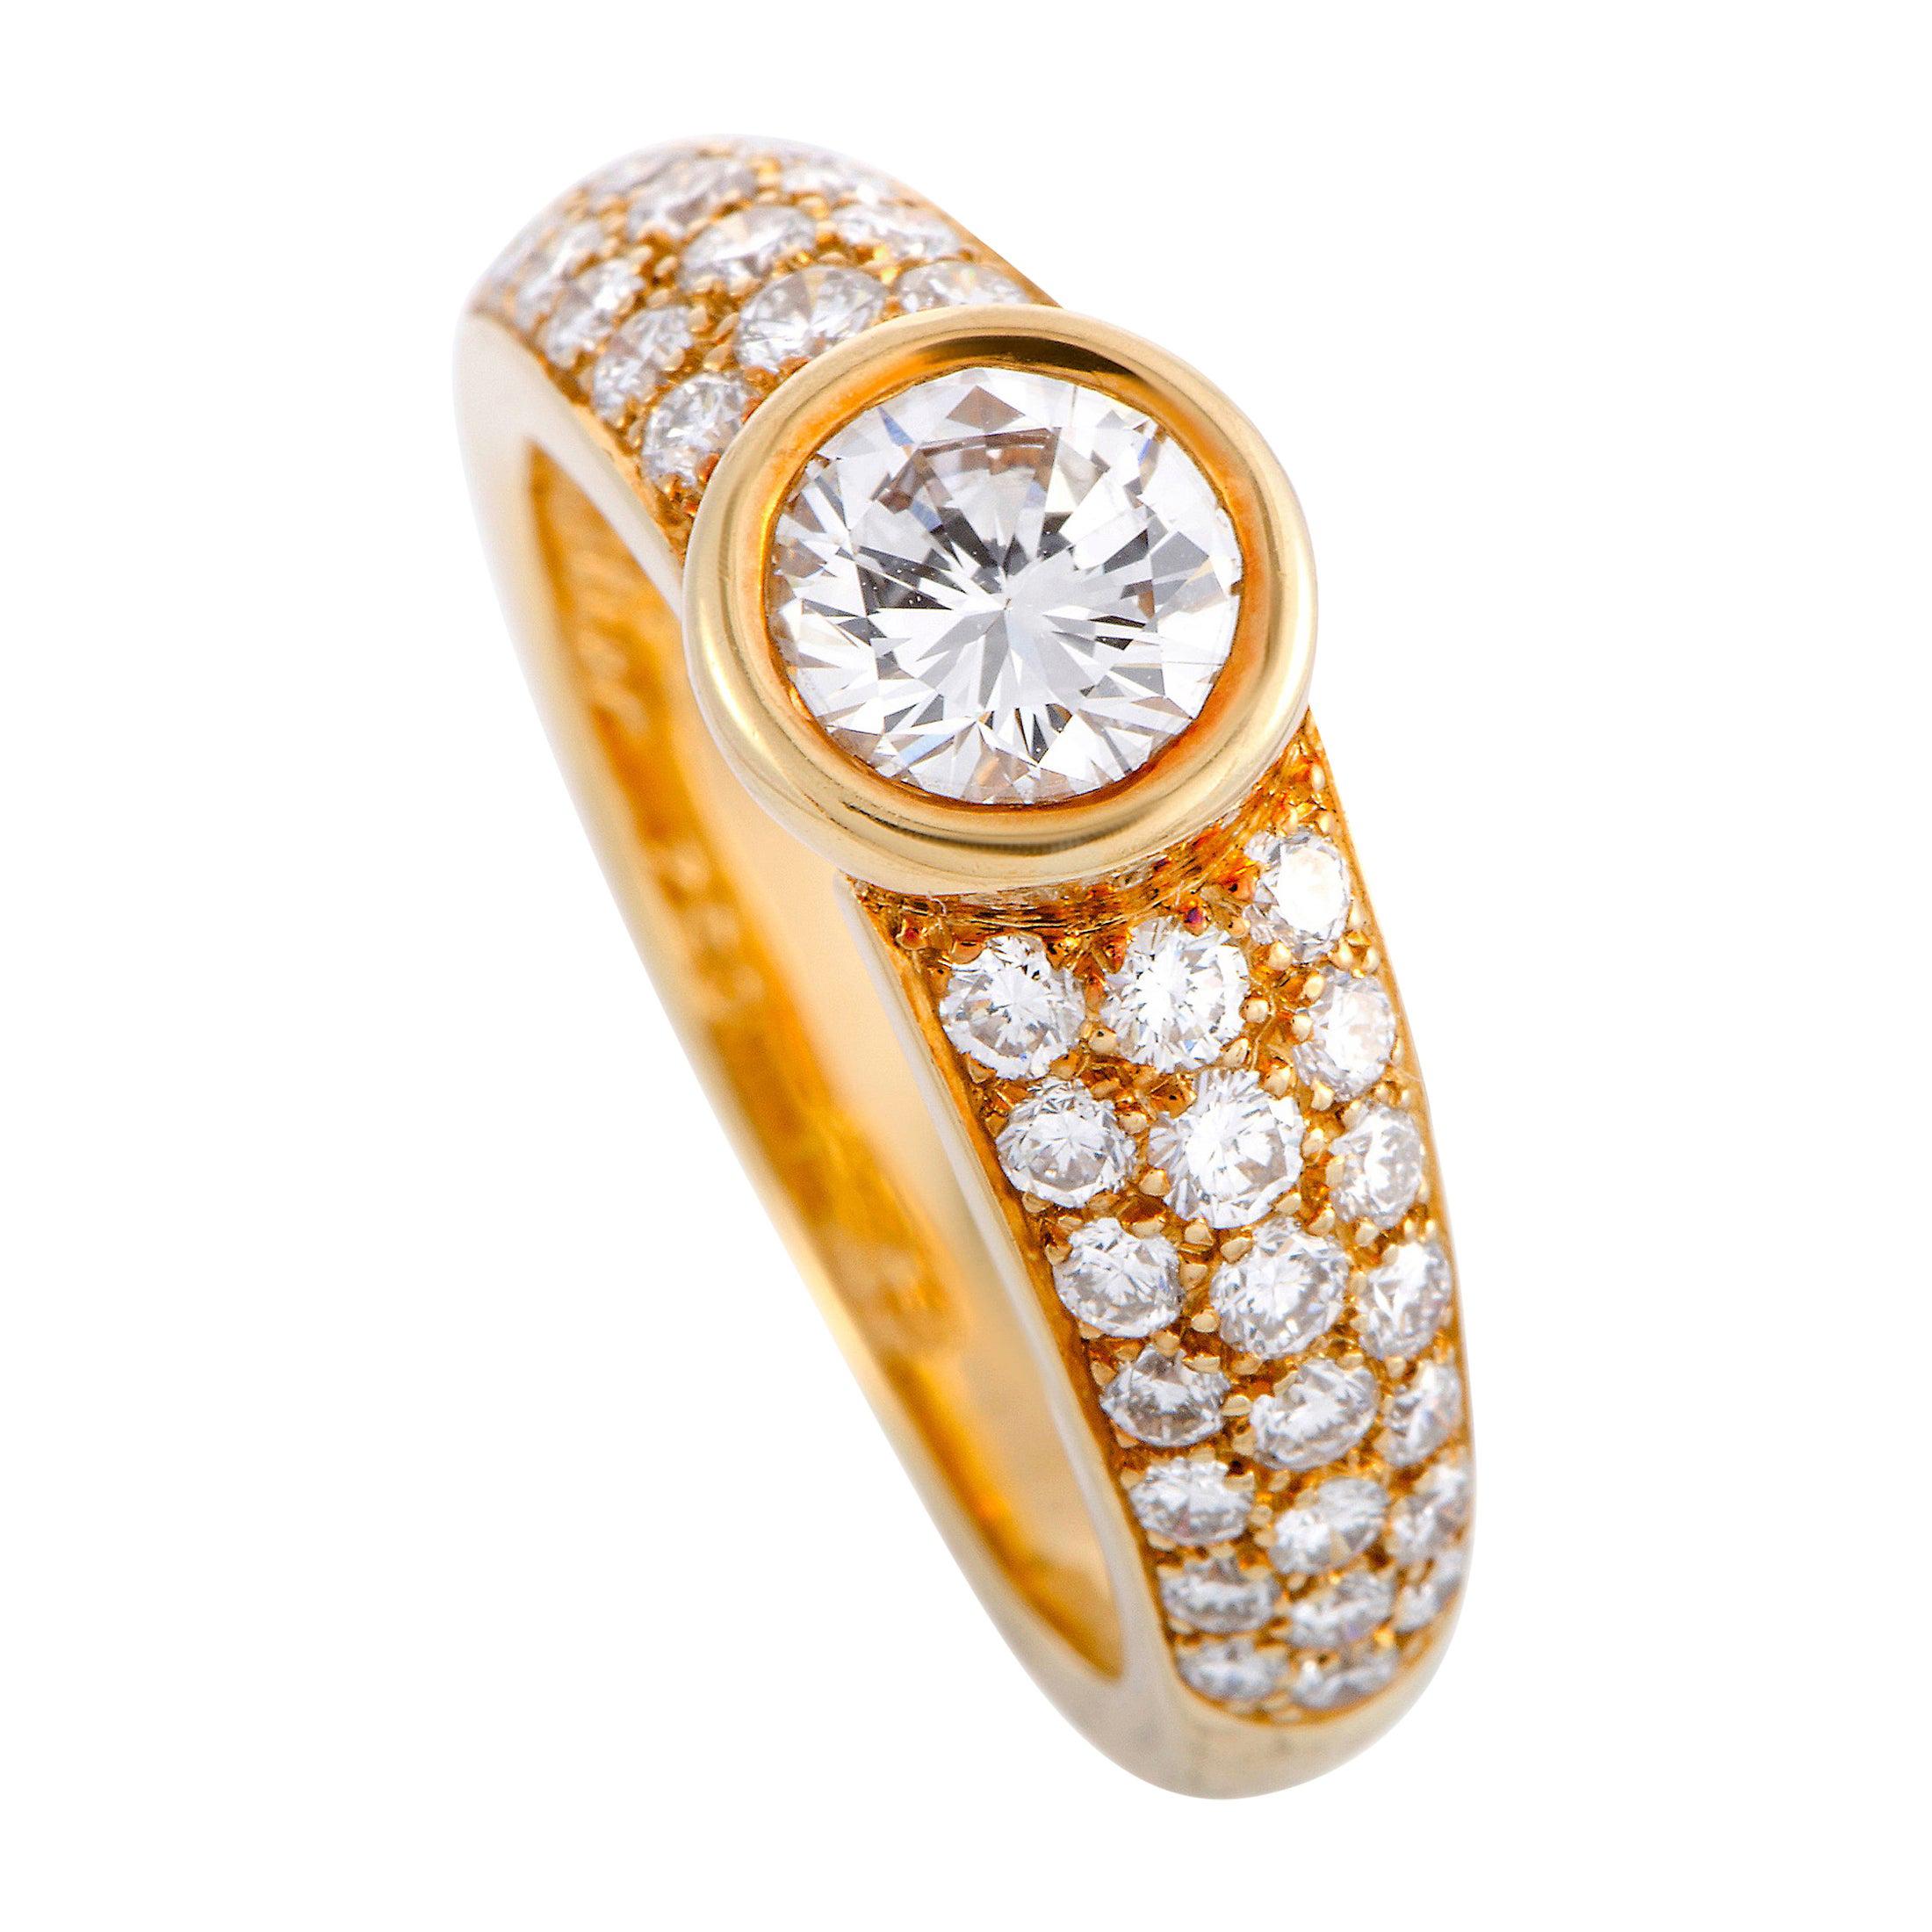 Cartier Diamond Pave Yellow Gold Engagement Ring